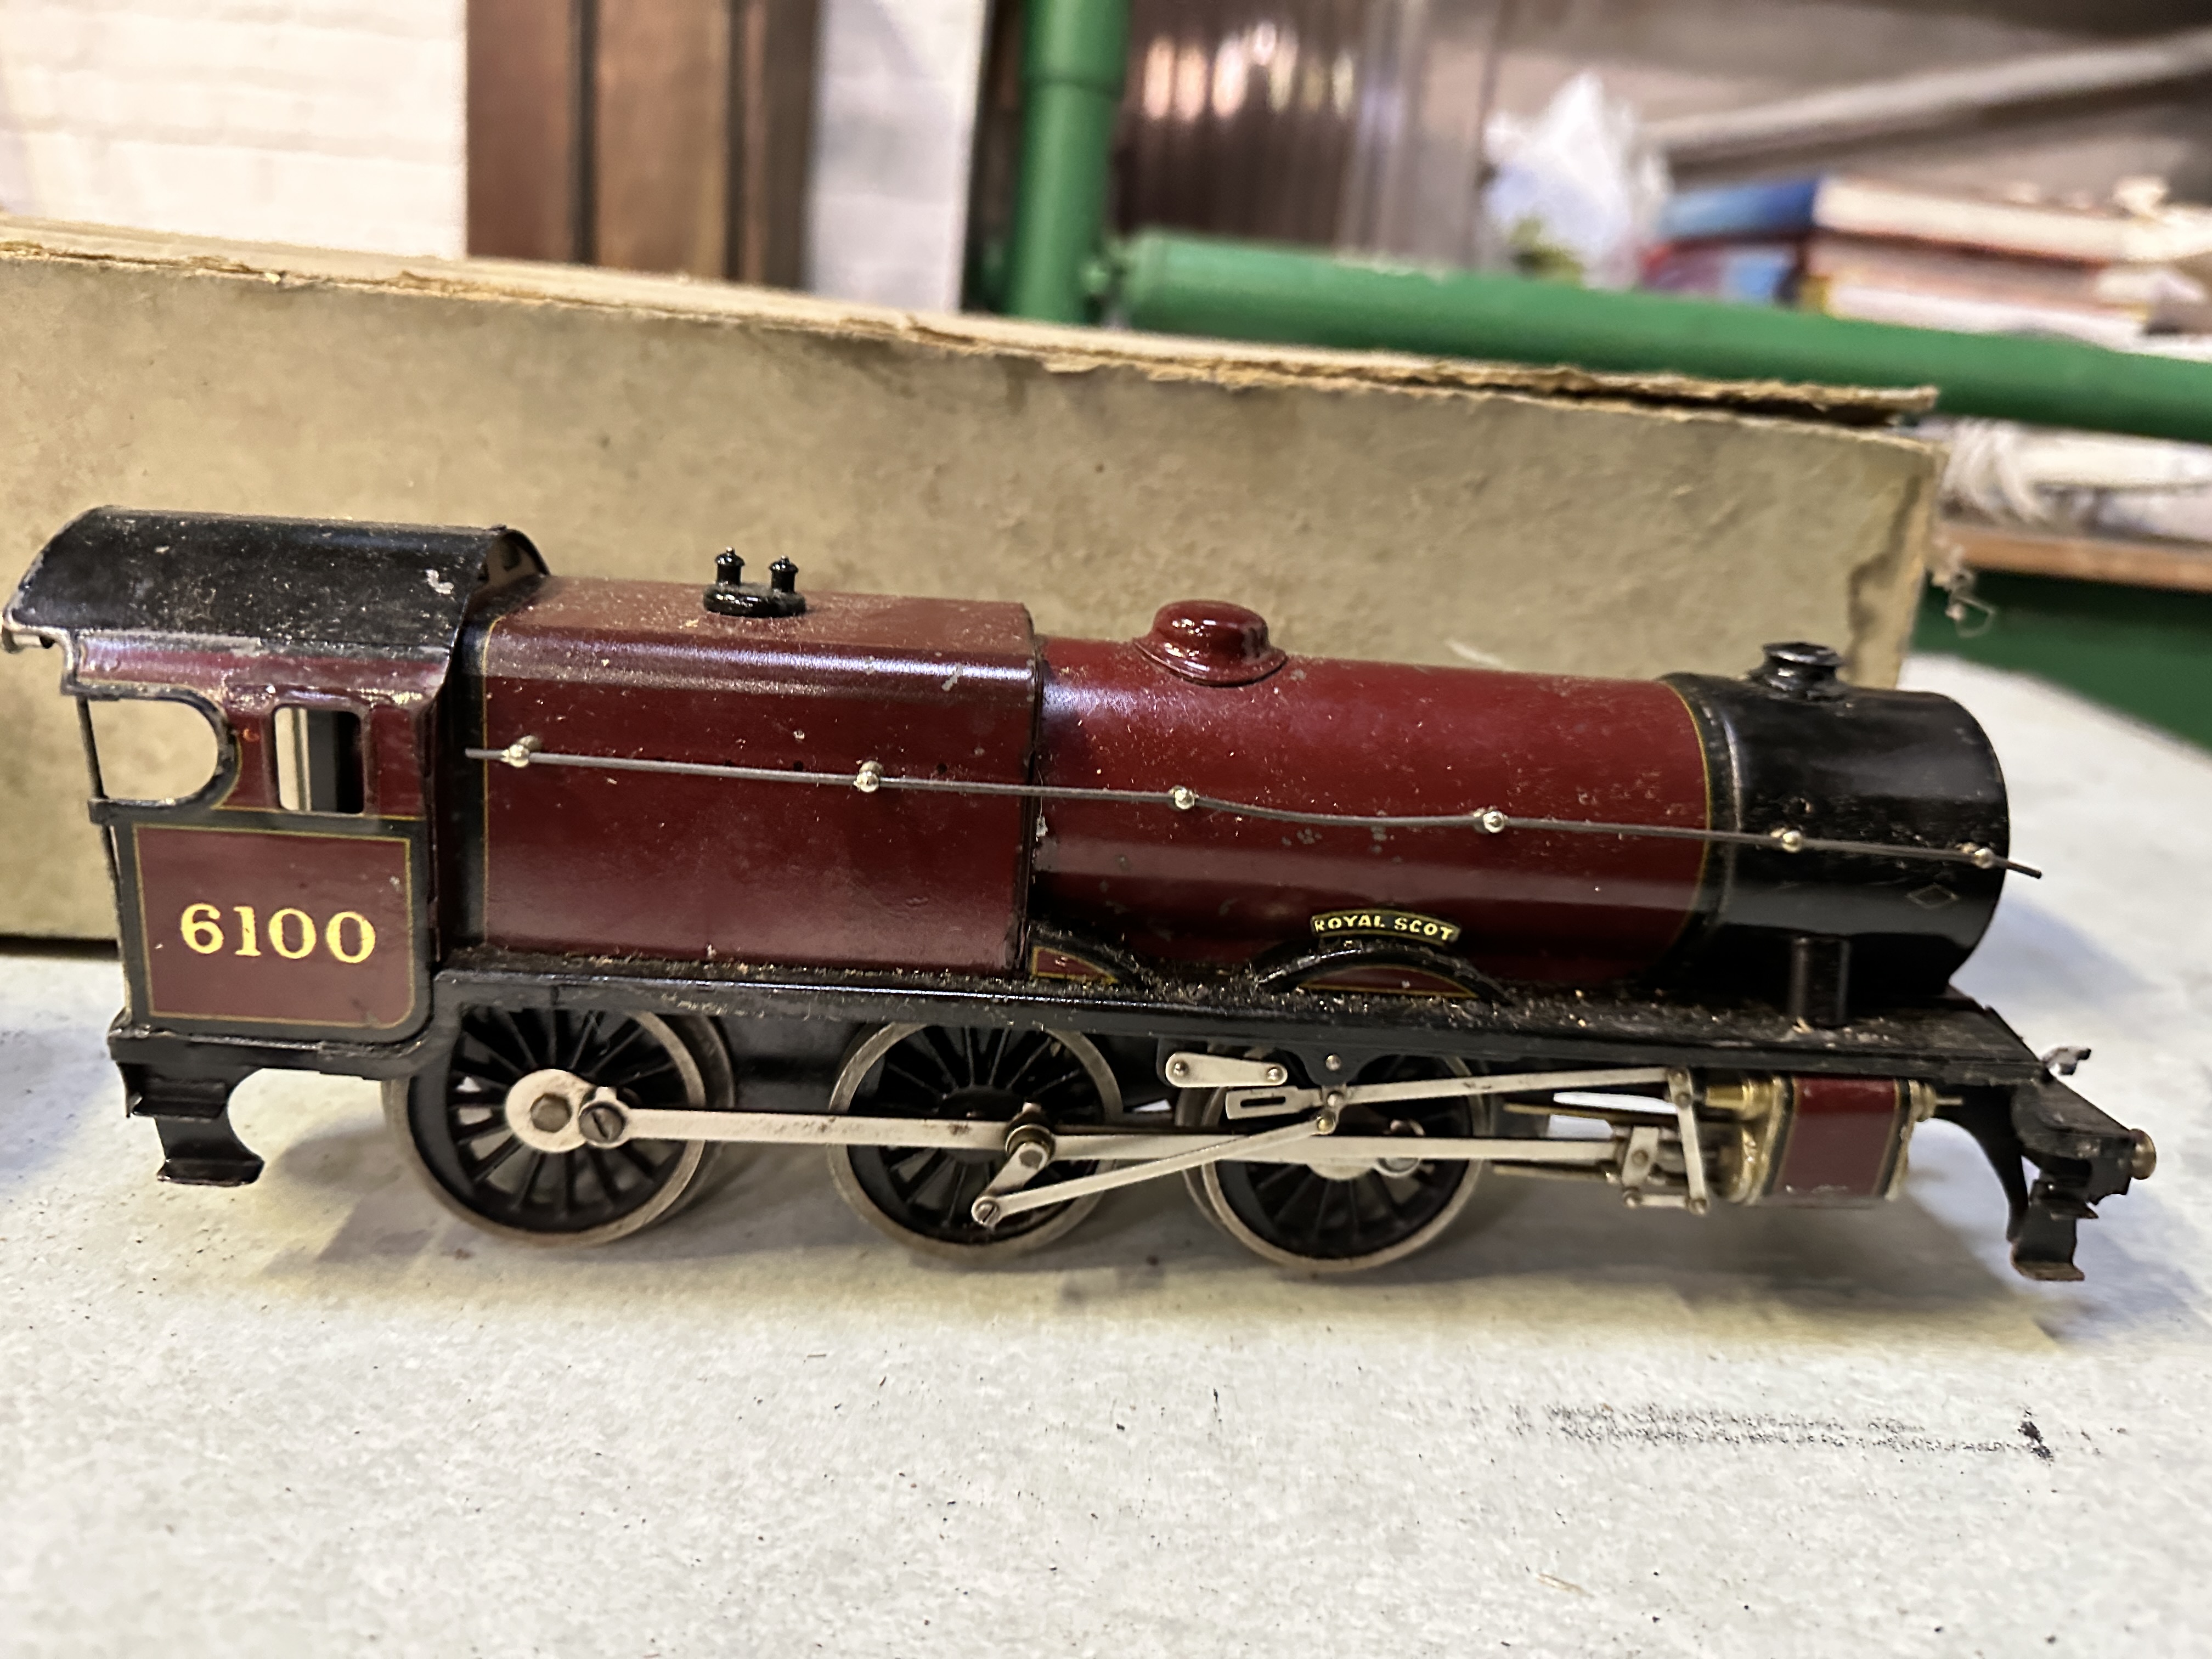 Scale model of the Royal Scot locomotive 6100 - Image 3 of 4